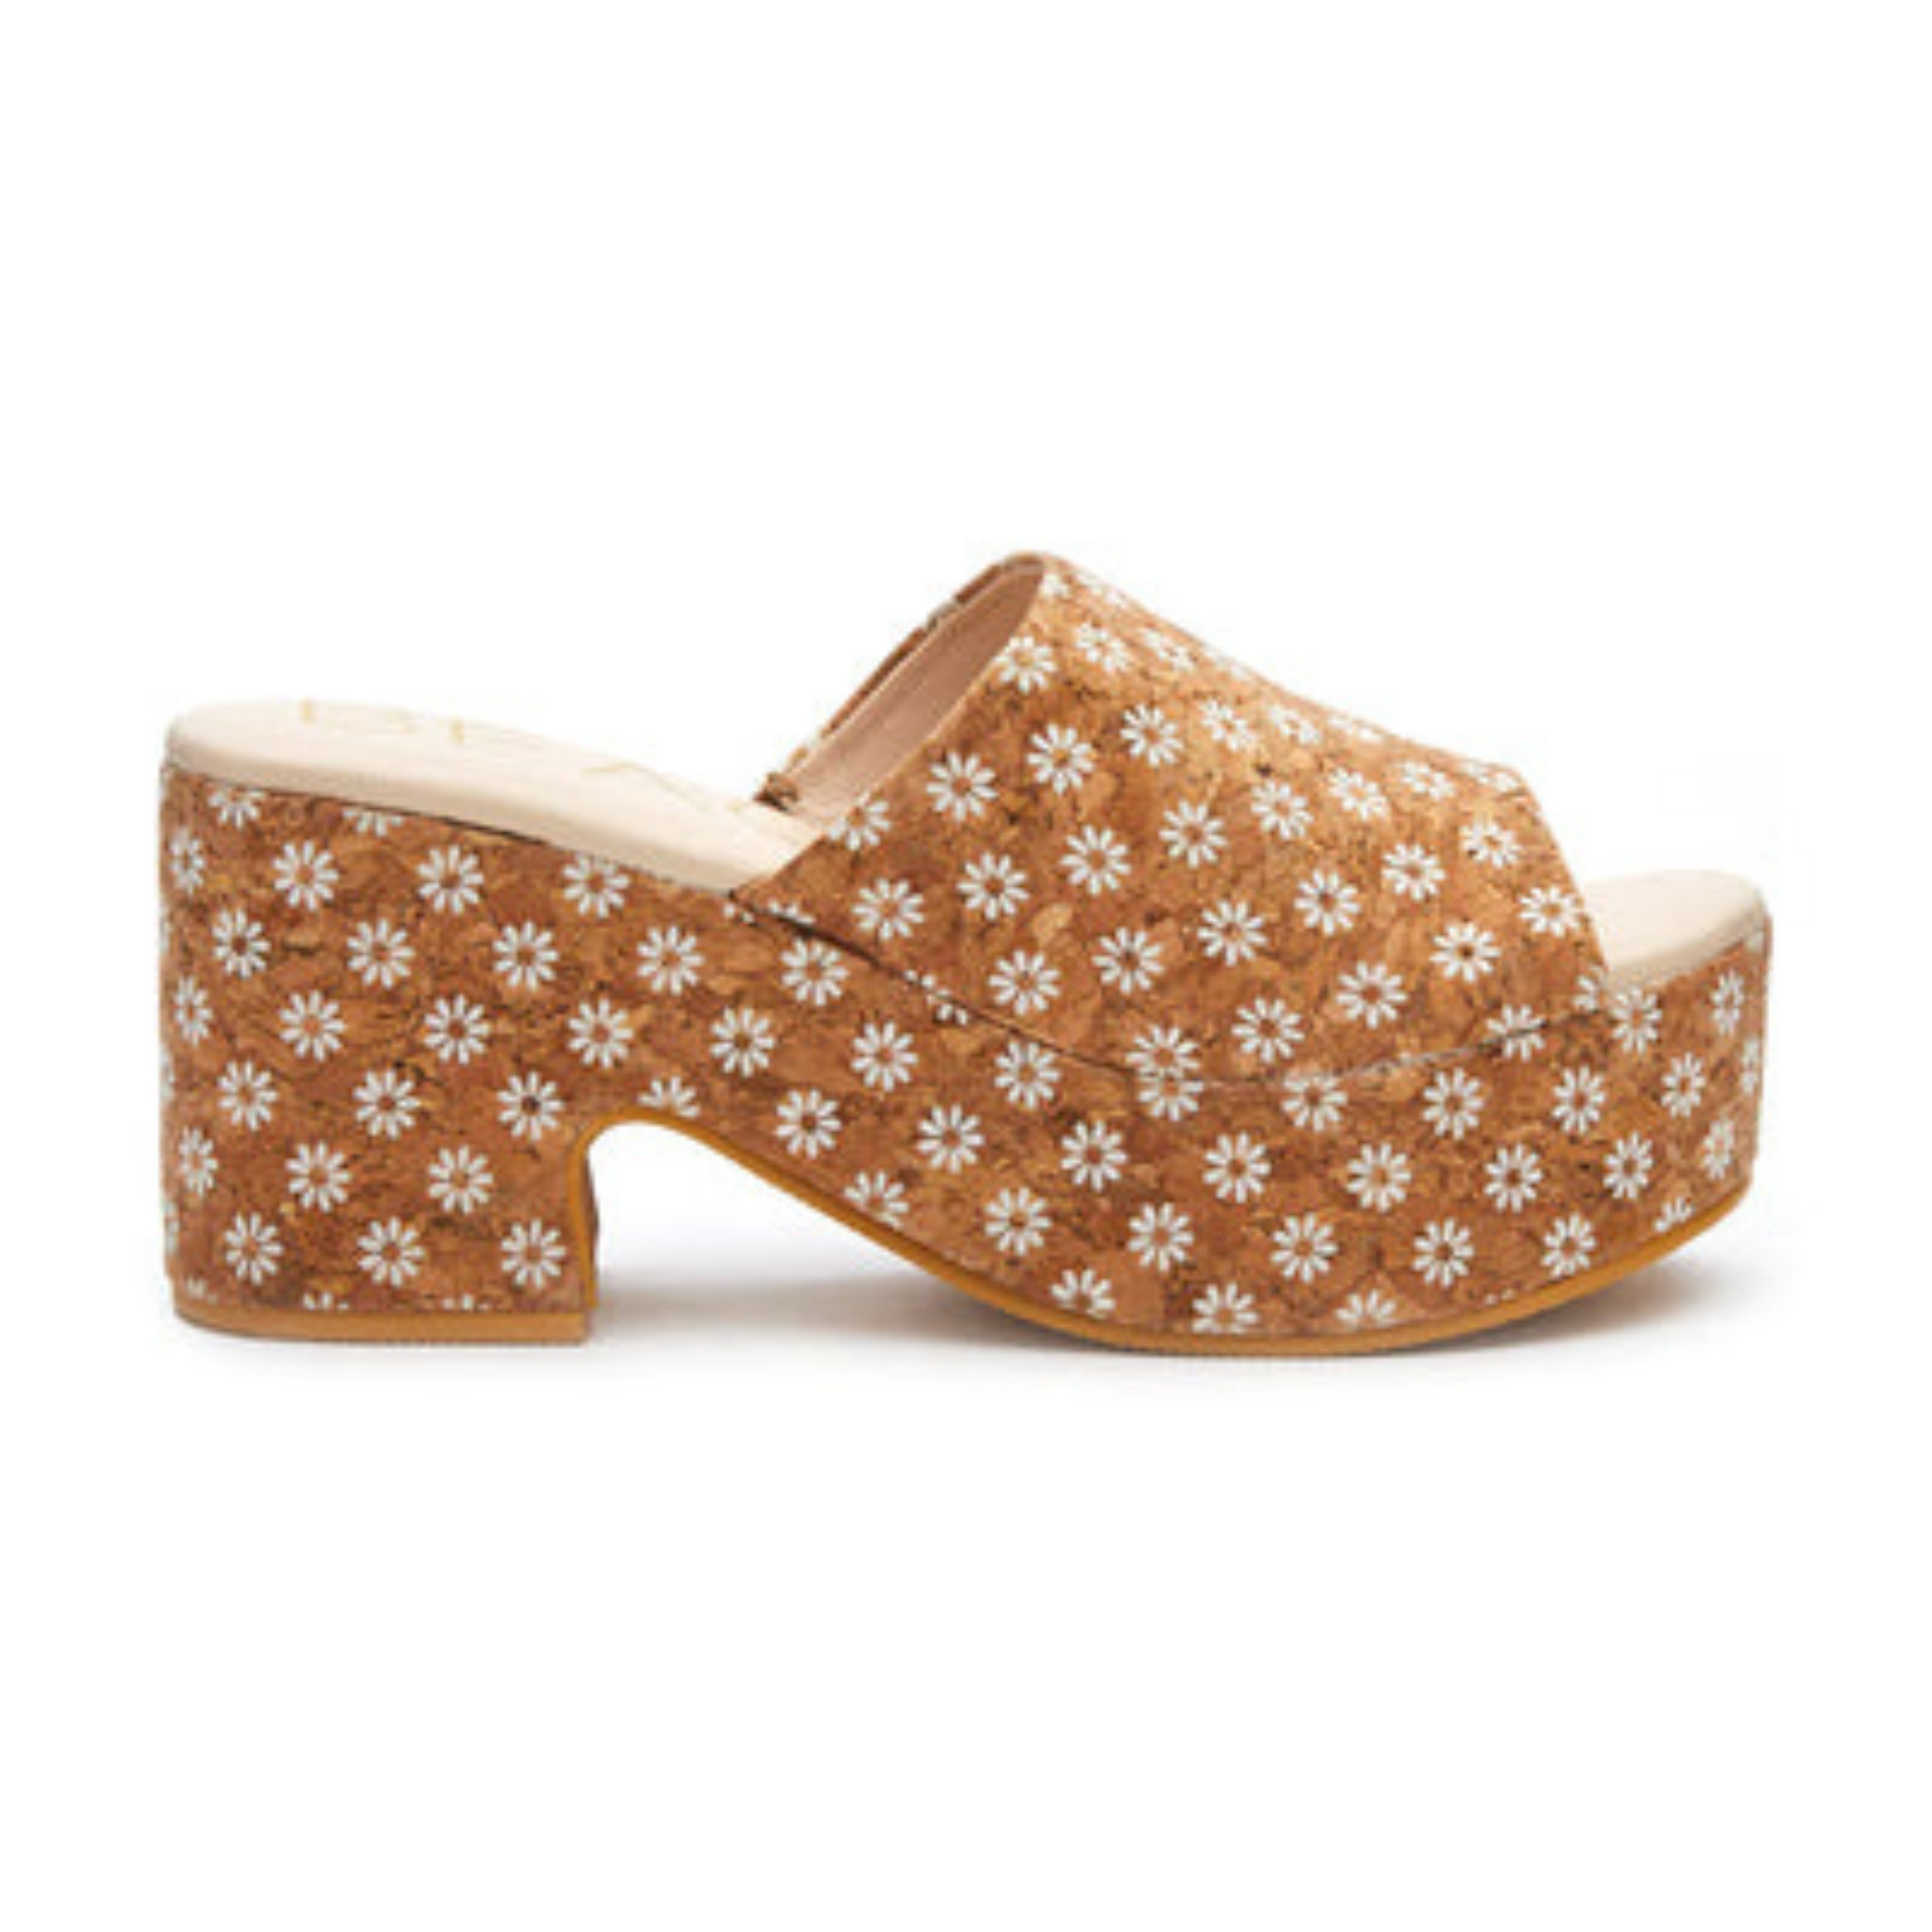 open toe sandal wedge from Matisse. Made from cork material, with daisy print design